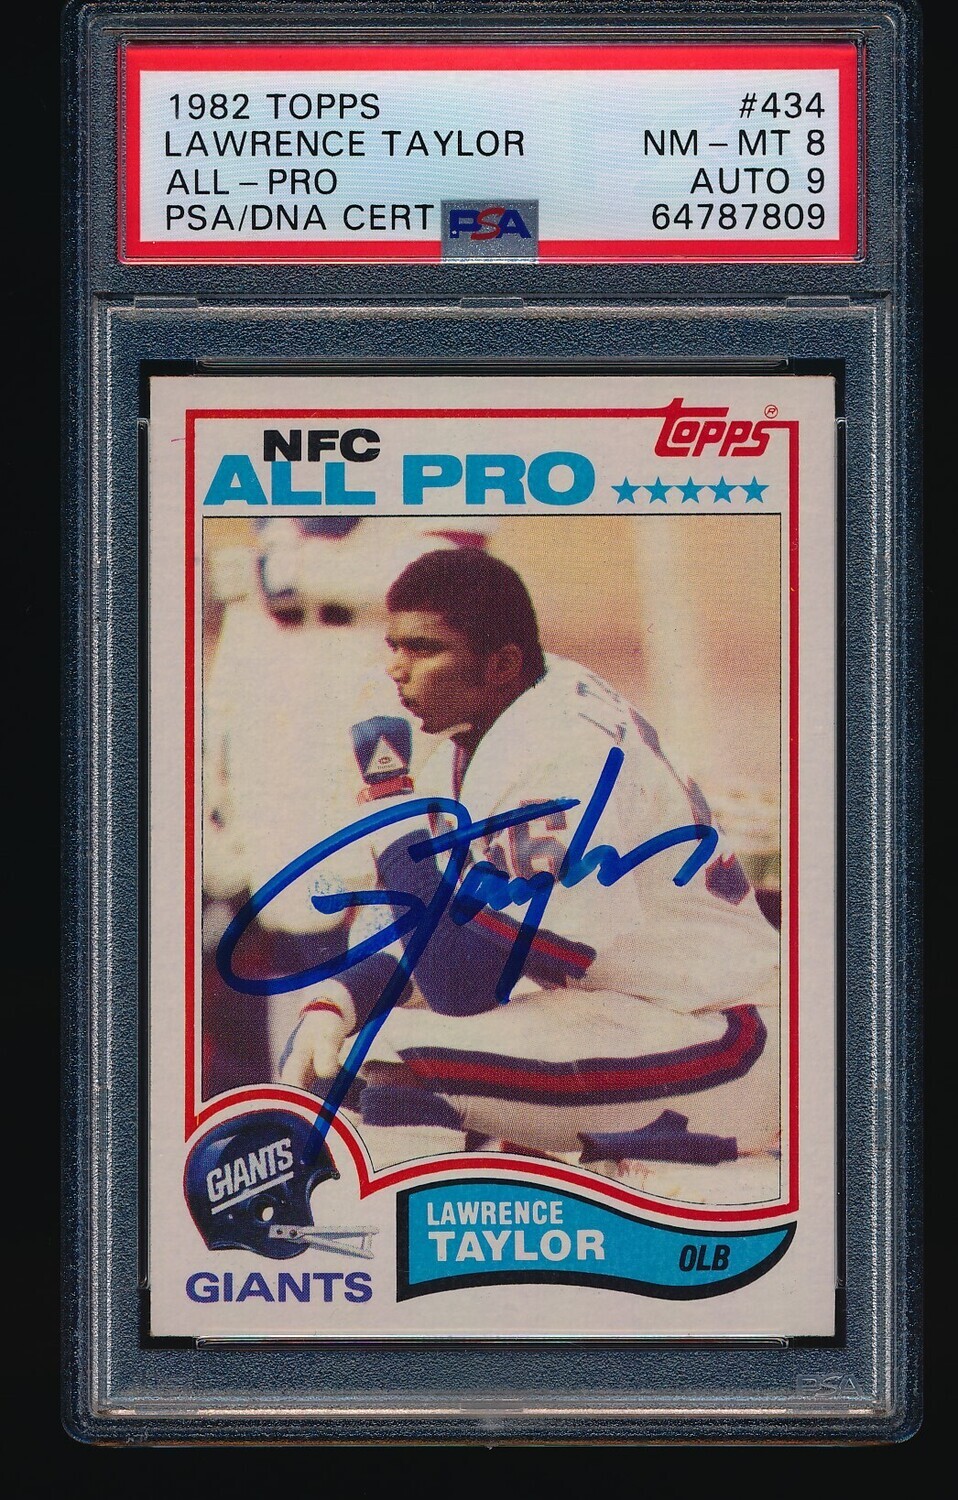 1982 Topps Signed Autographed LAWRENCE TAYLOR Rookie #434 PSA 8 Auto 9